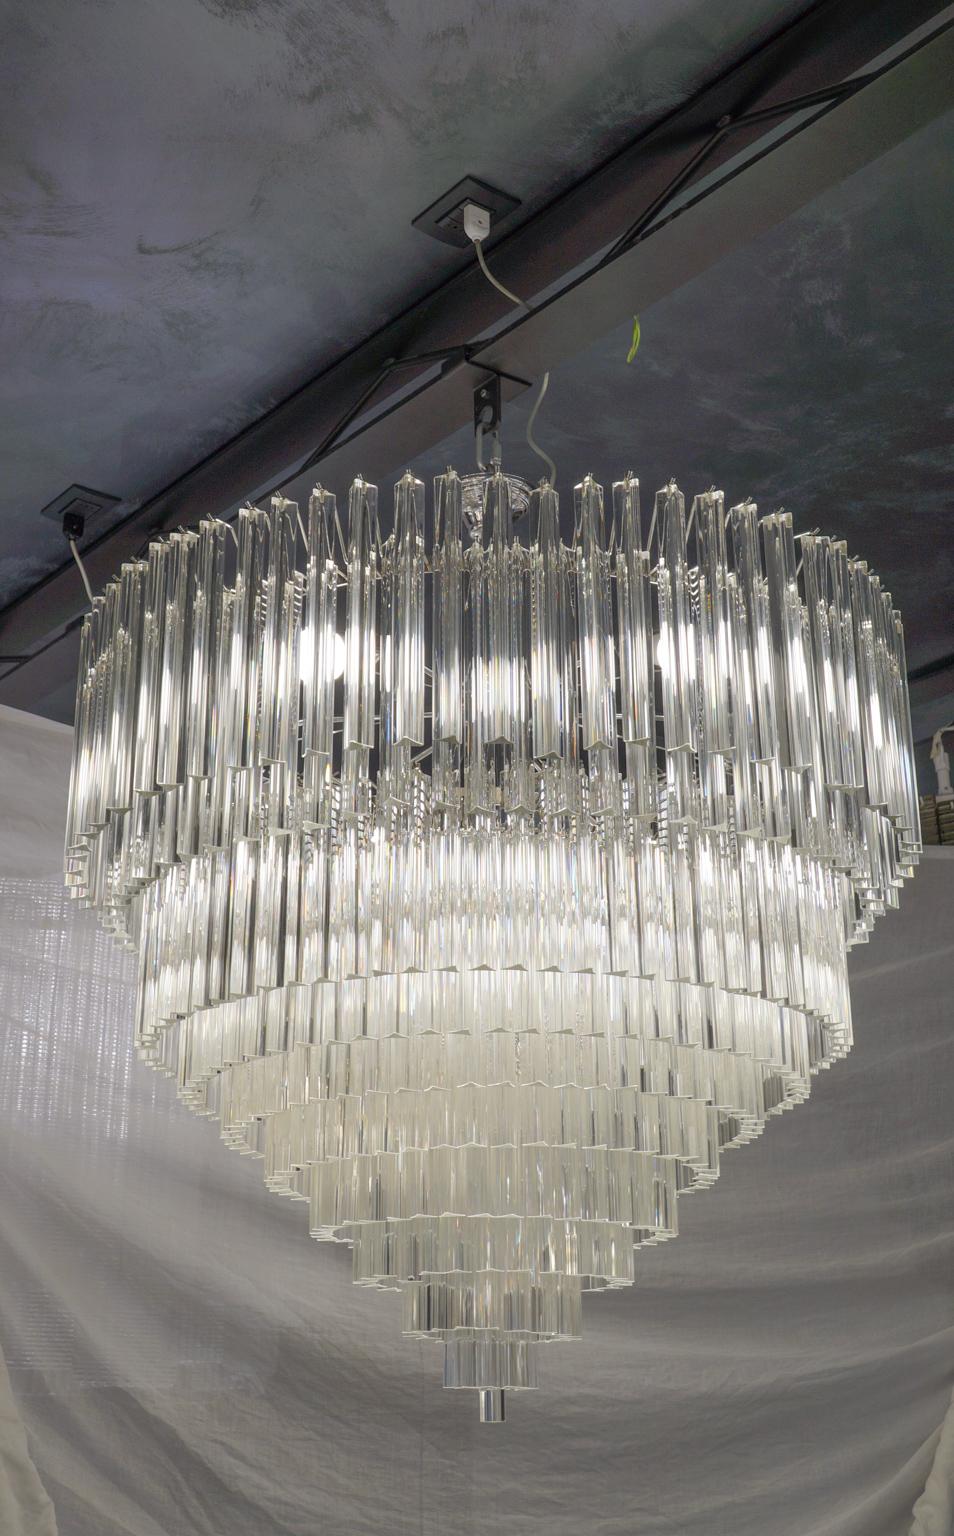 Murano glass chandelier with 457 elements in crystal, nickel finish structure and 12 E26 / E27 bulbs. The elements of this typical chandelier are called Triedri, for its triangular shape. The assistants take a small quantity of glass from the oven.